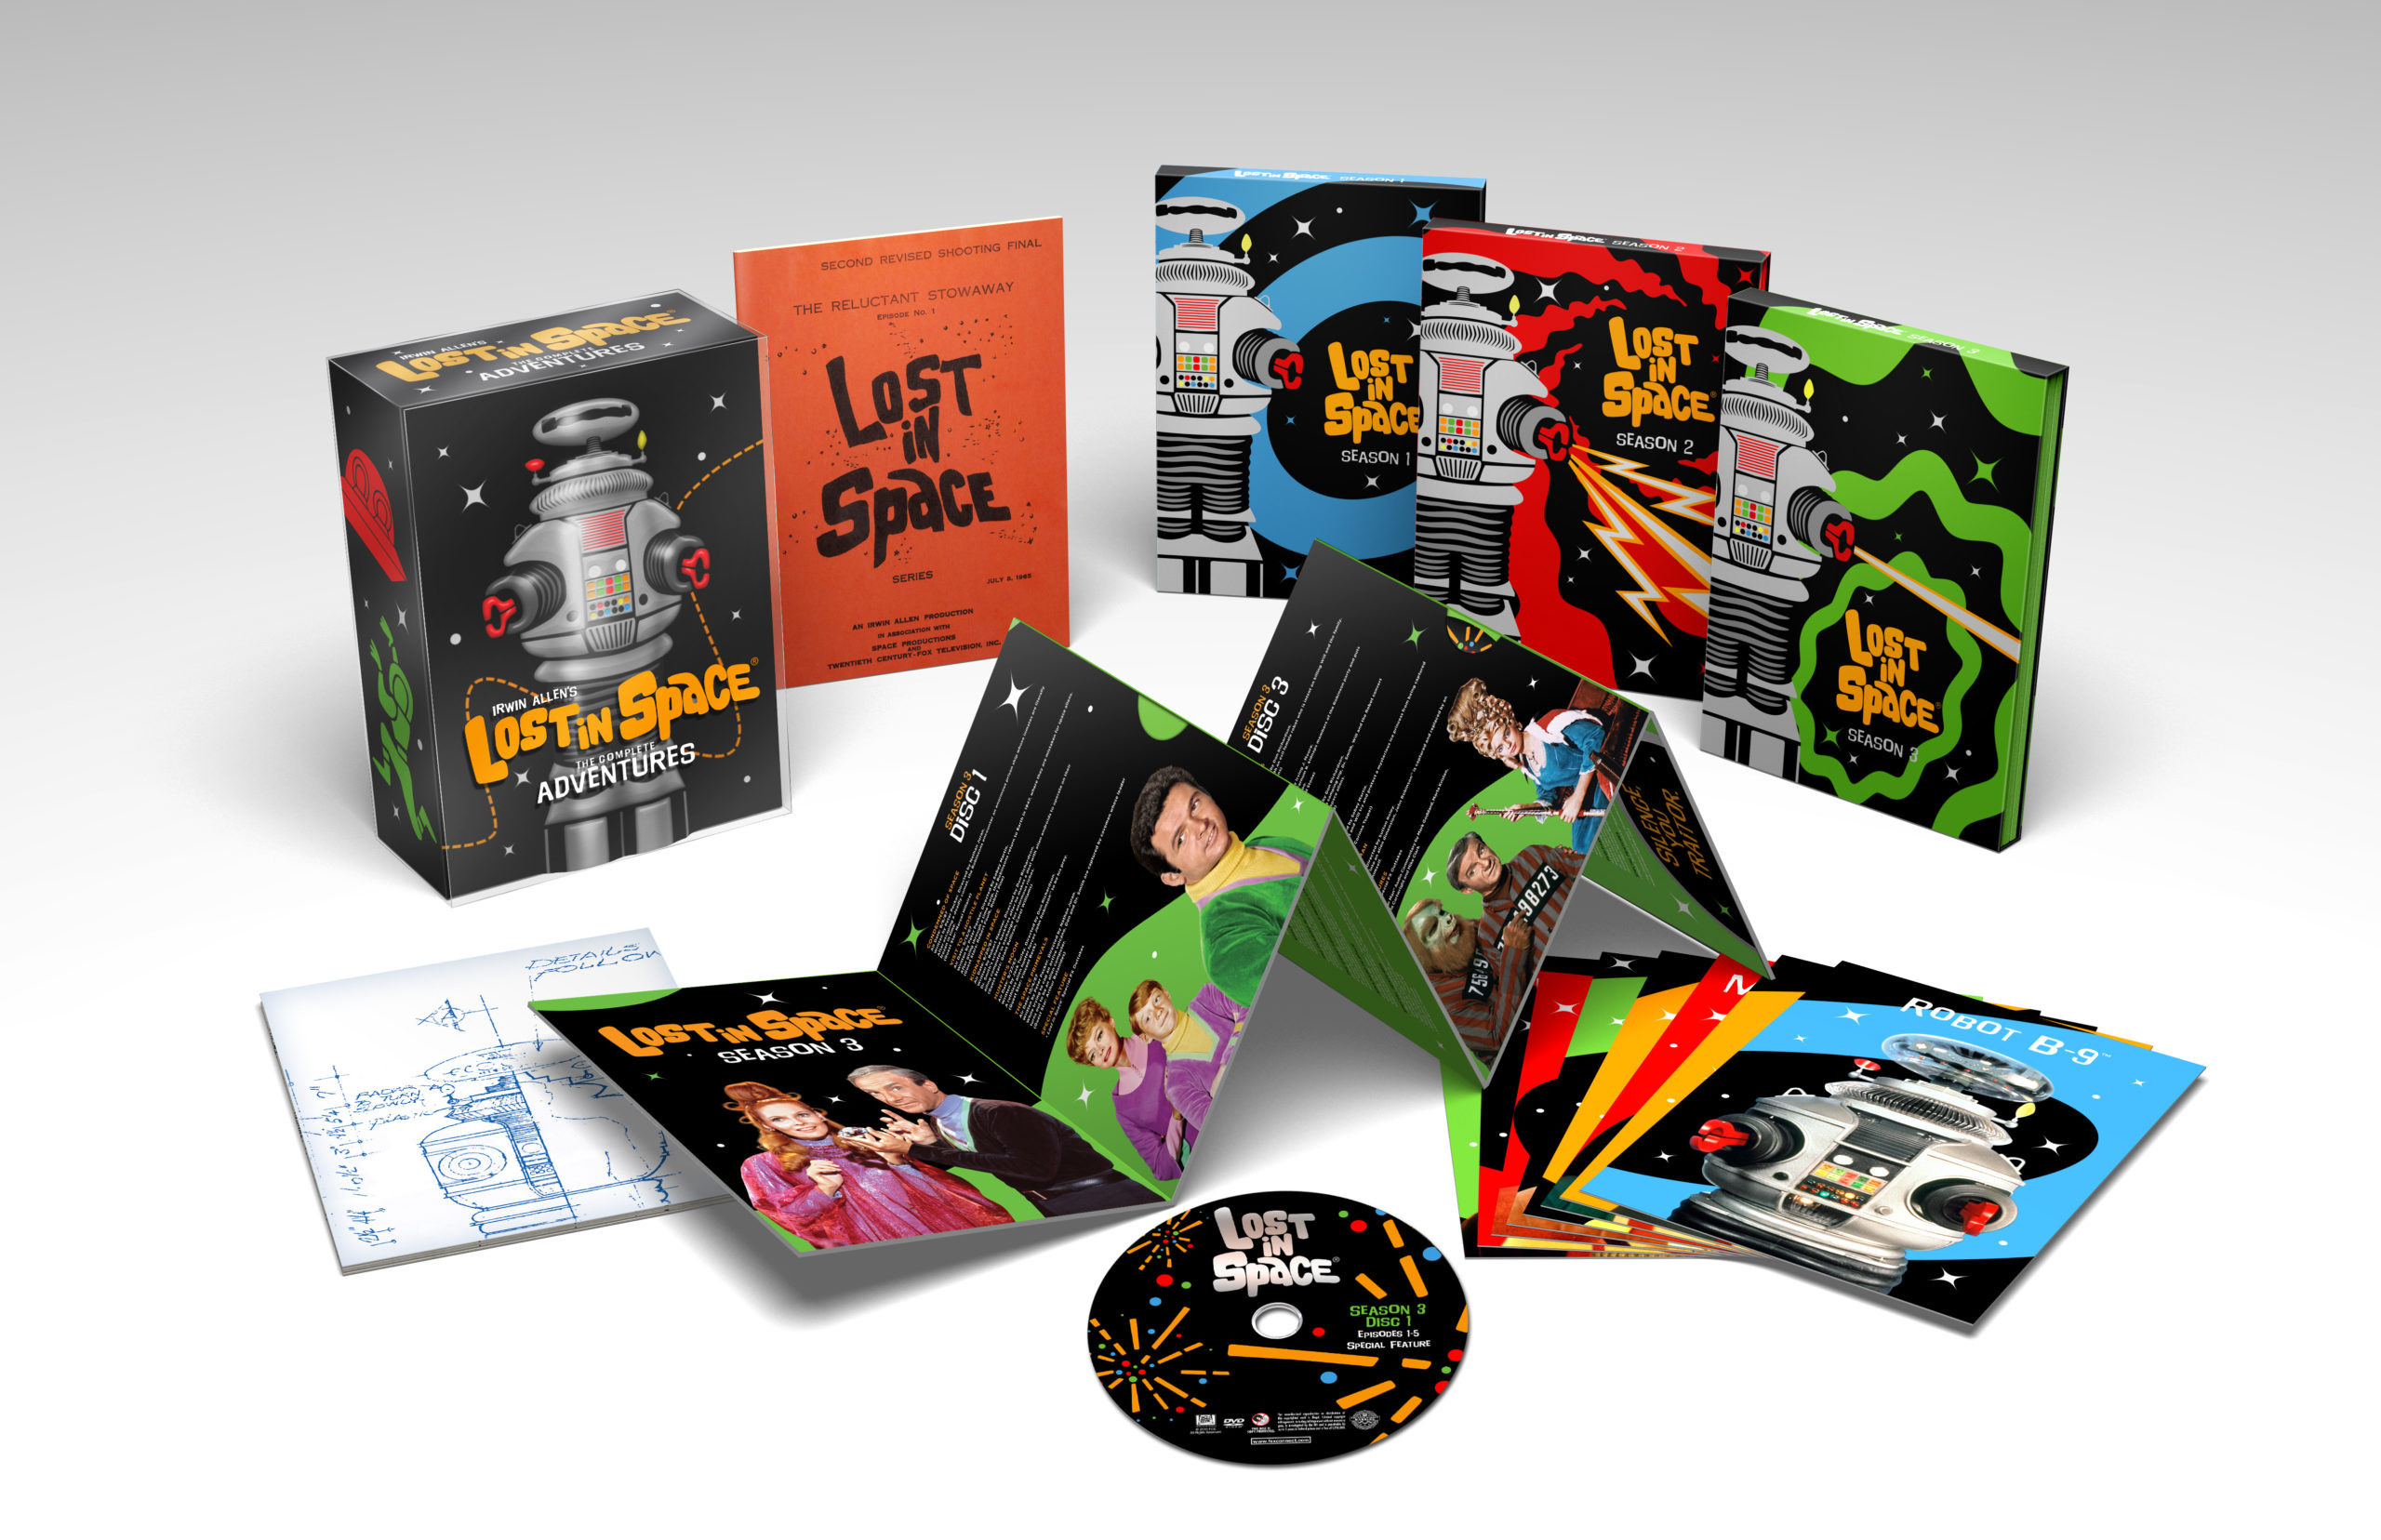 Lost in Space: The Complete Adventures